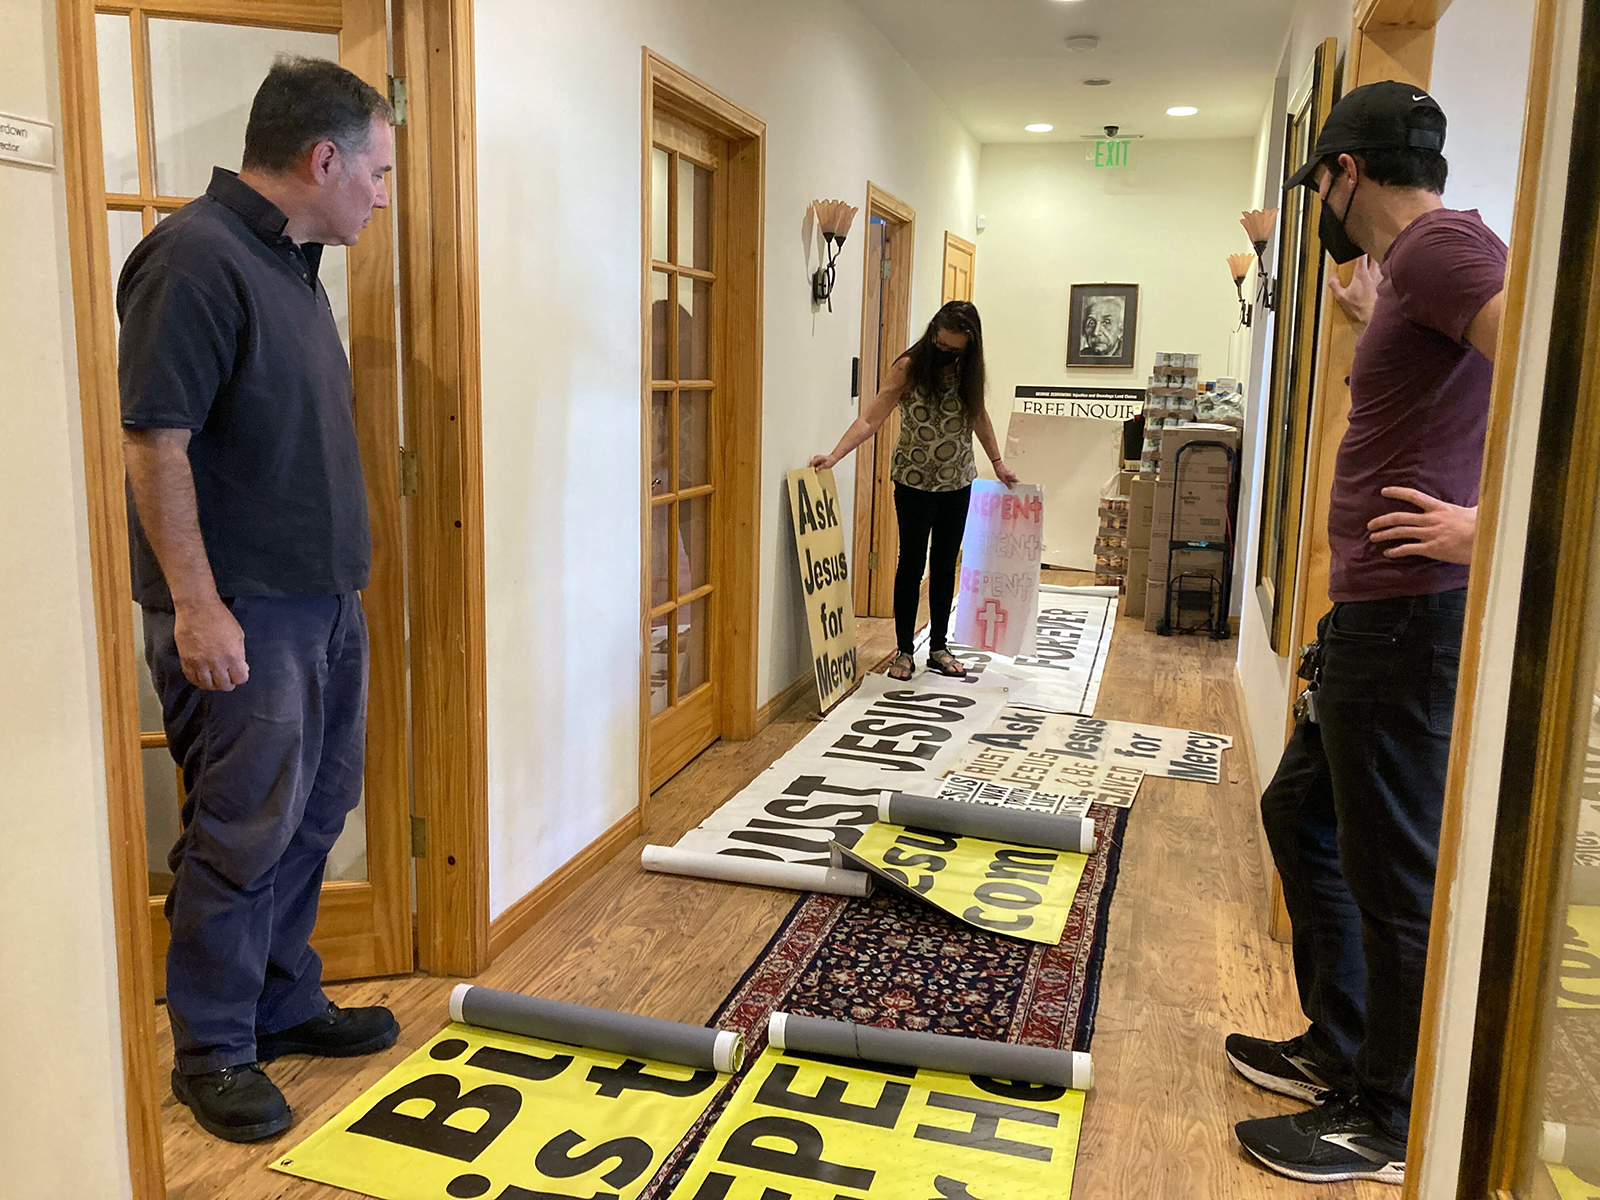 Christine Jones, center, of Atheists United, displays illegally placed religious material that the group has removed from public streets in Los Angeles, at the group's offices, Saturday, Feb. 19, 2022. RNS photo by Alejandra Molina